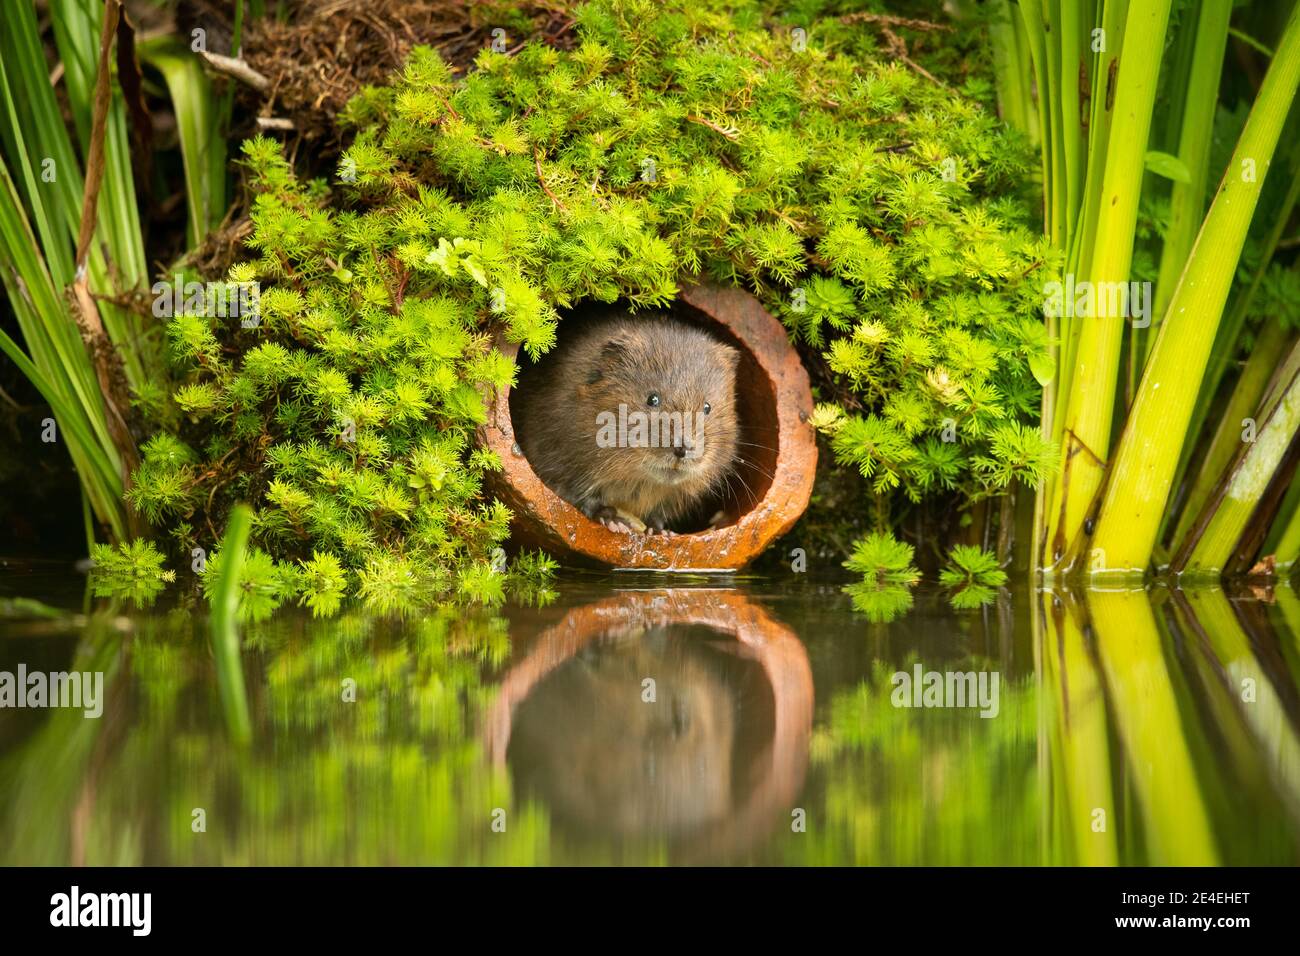 Curious Water Vole Stock Photo